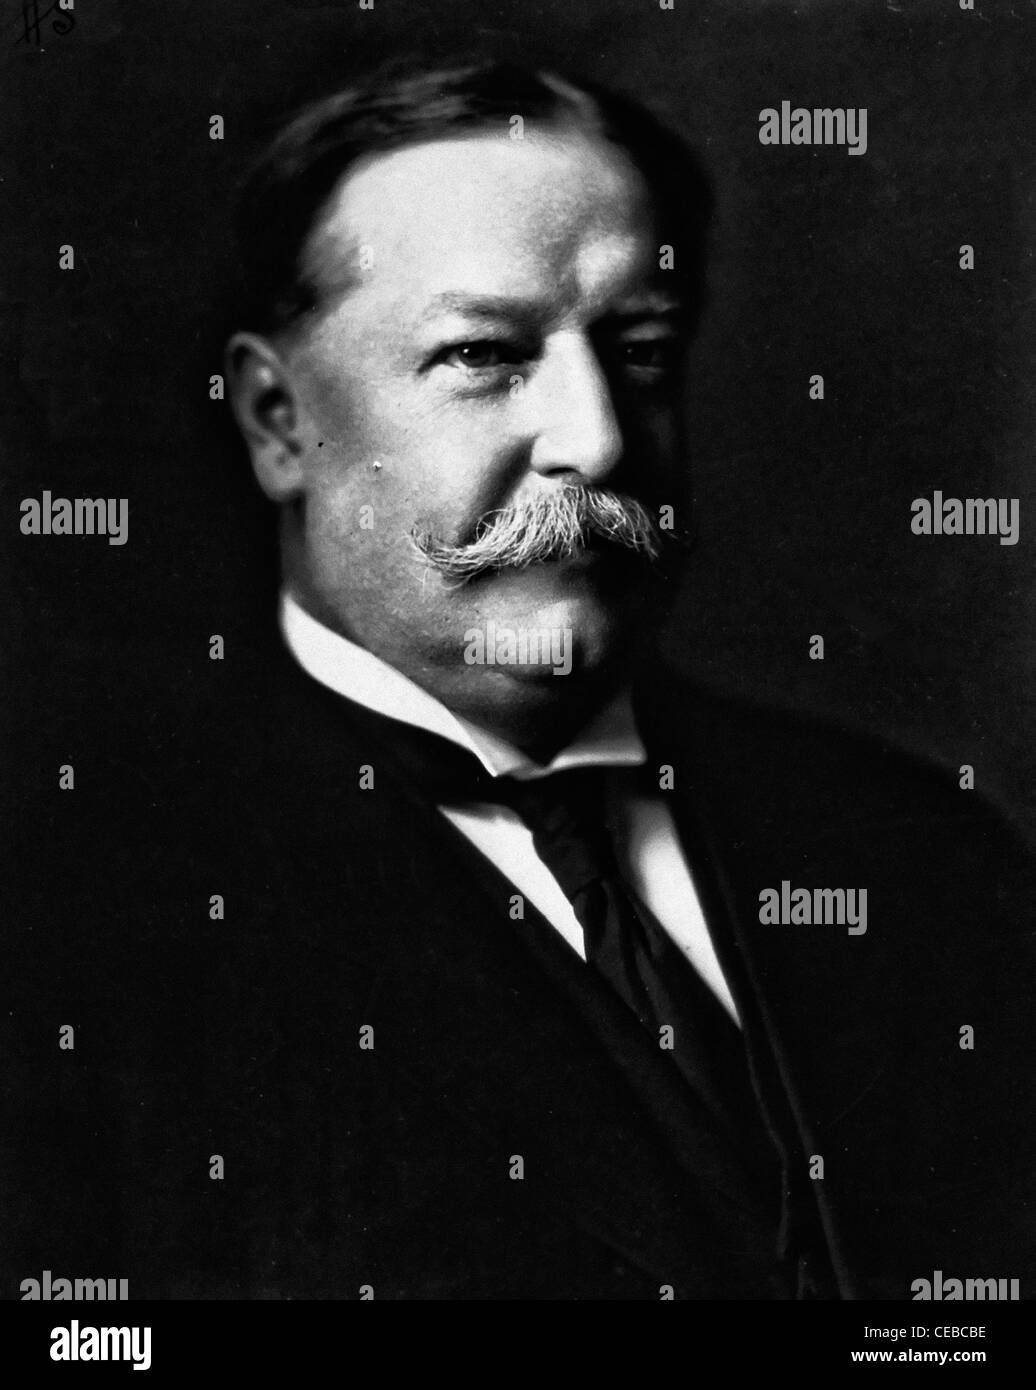 27th President of the United States New 5x7 Photo William Howard Taft 